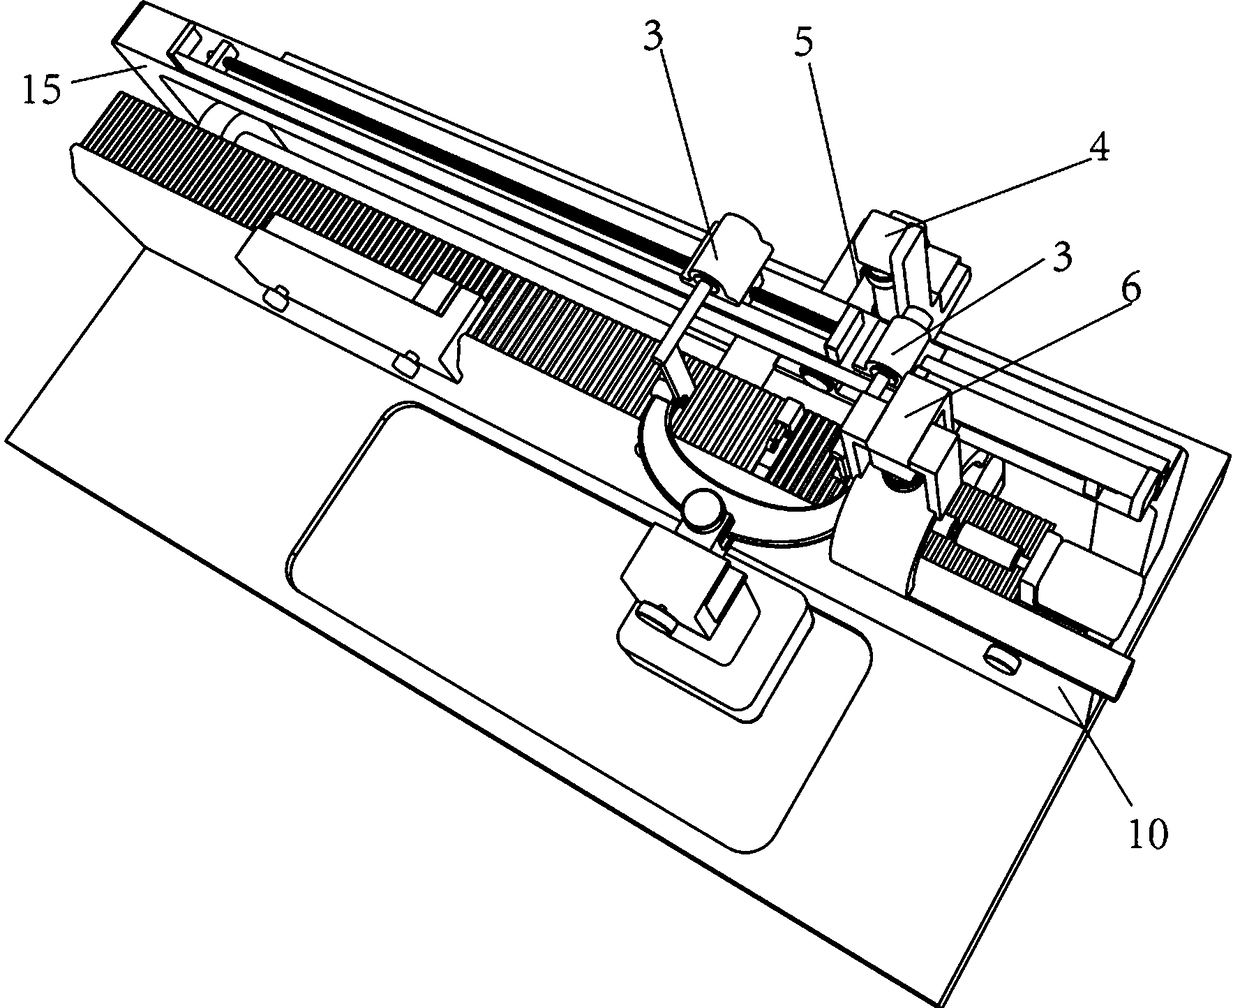 Intelligent verification system and detection method for micrometer